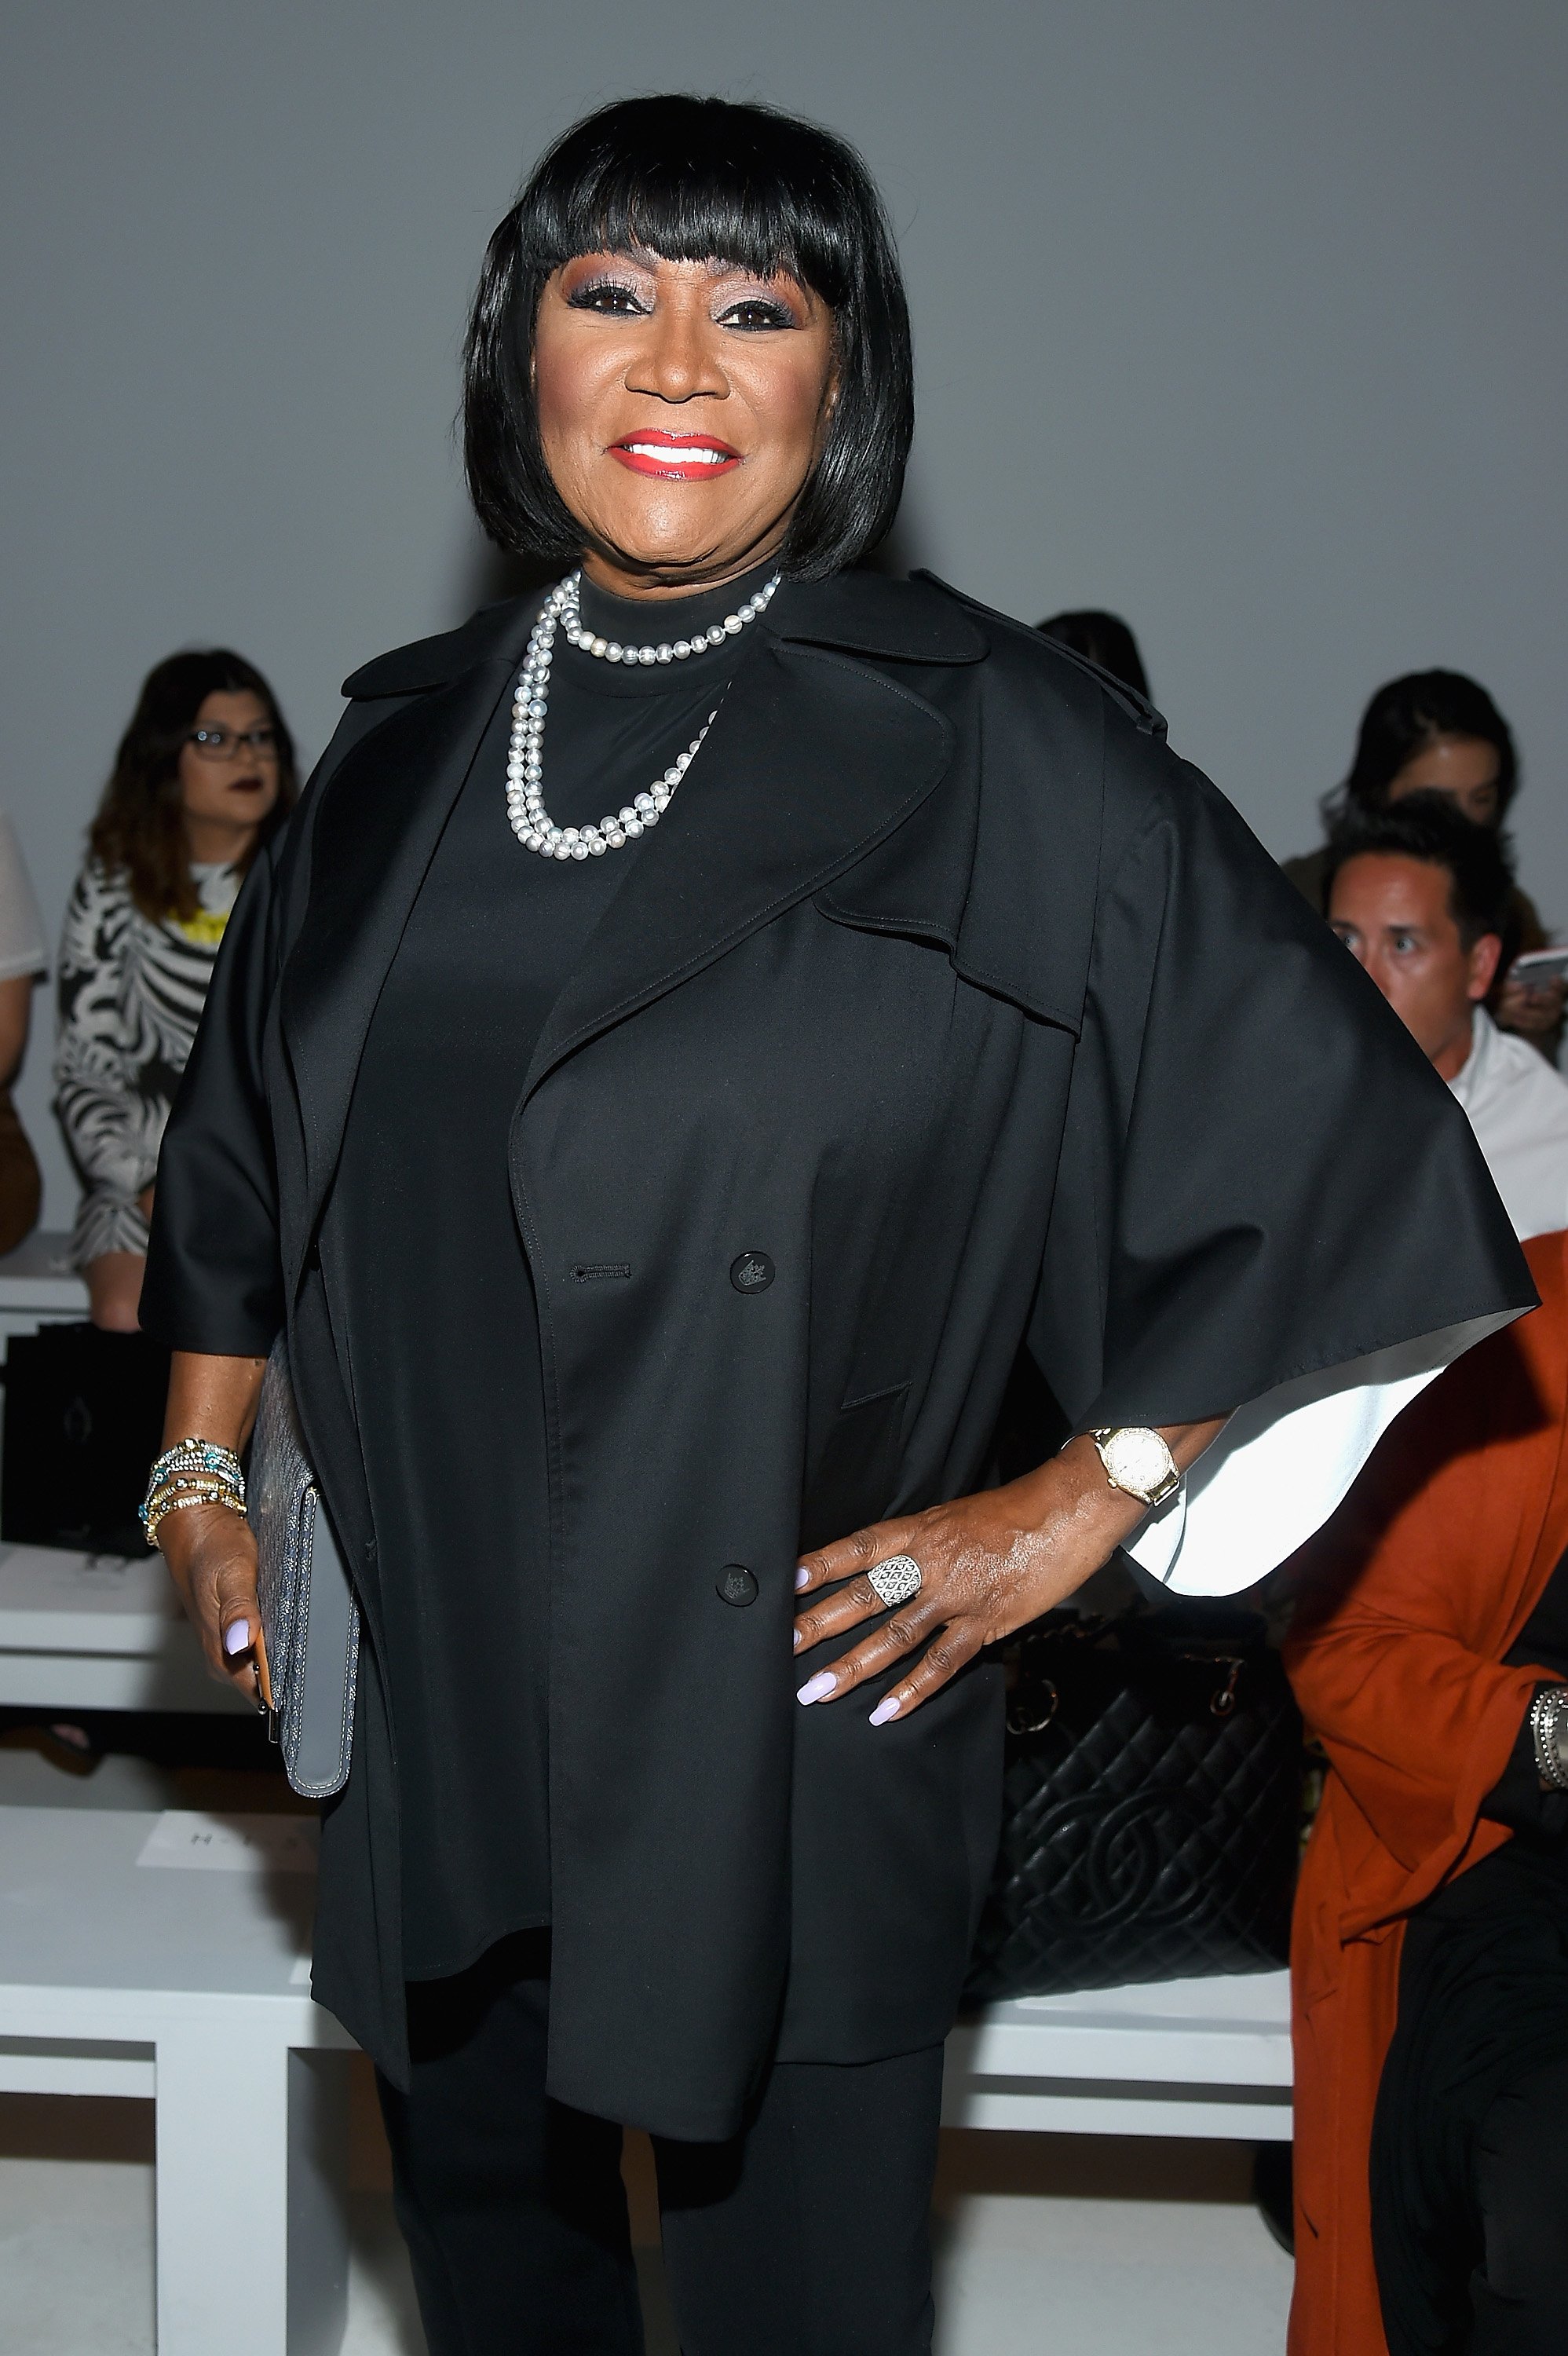 Patti LaBelle during New York Fashion Week on Sept. 13, 2017 in New York City | Photo: Getty Images